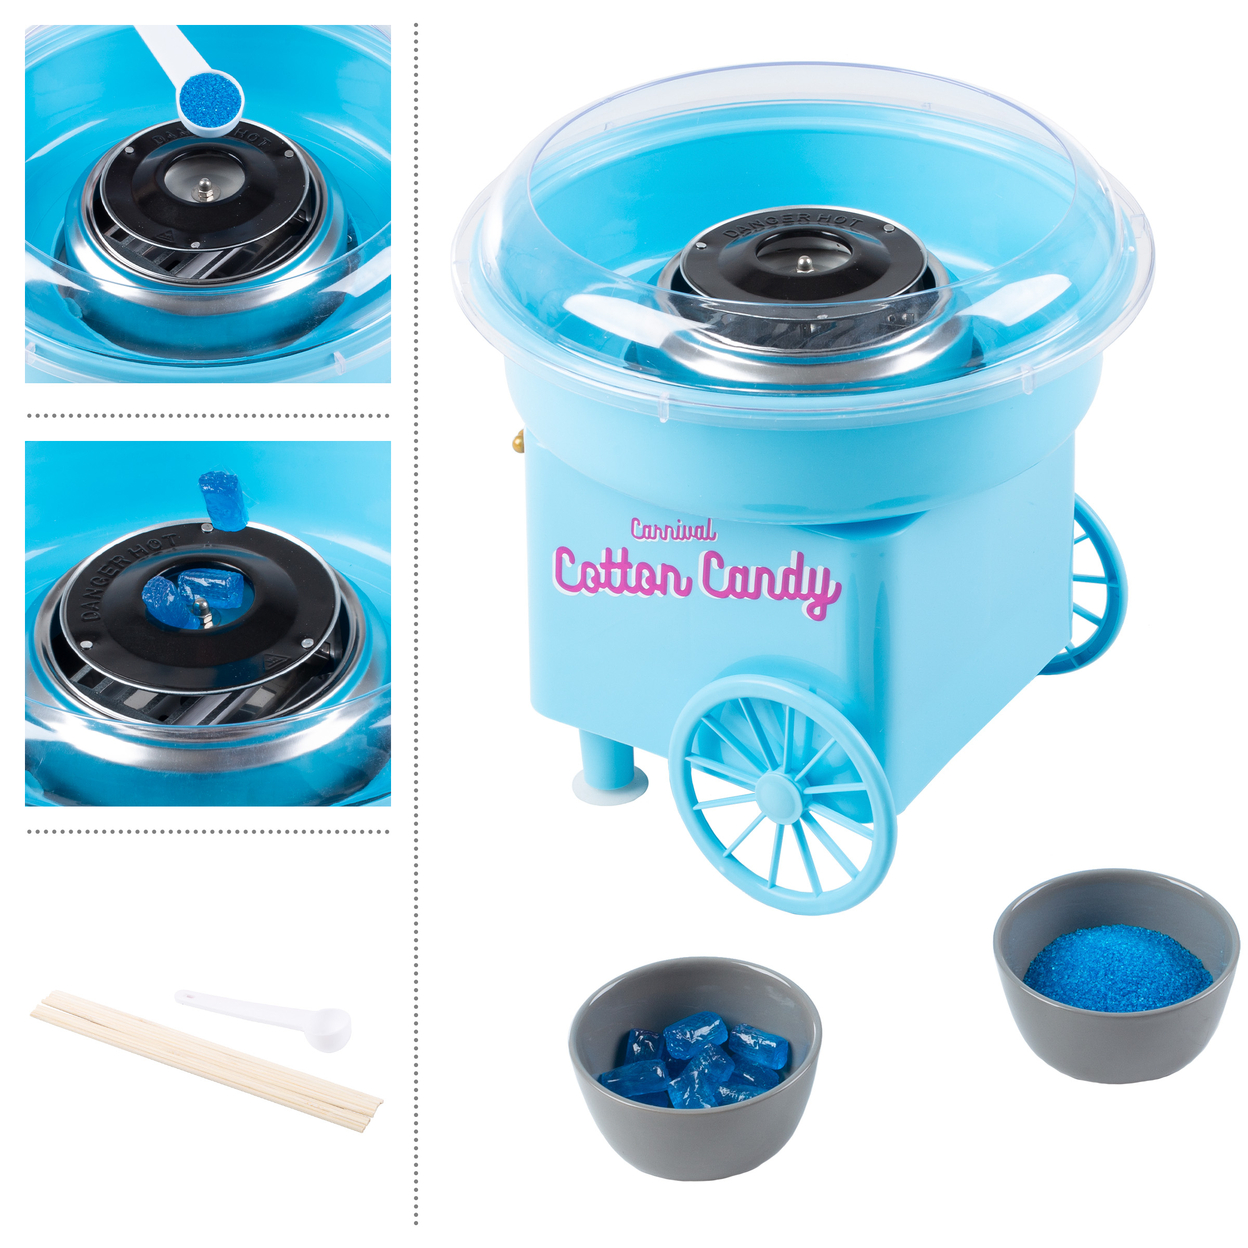 Countertop Cotton Candy Machine Includes Scoop And 10 Serving Sticks, Blue